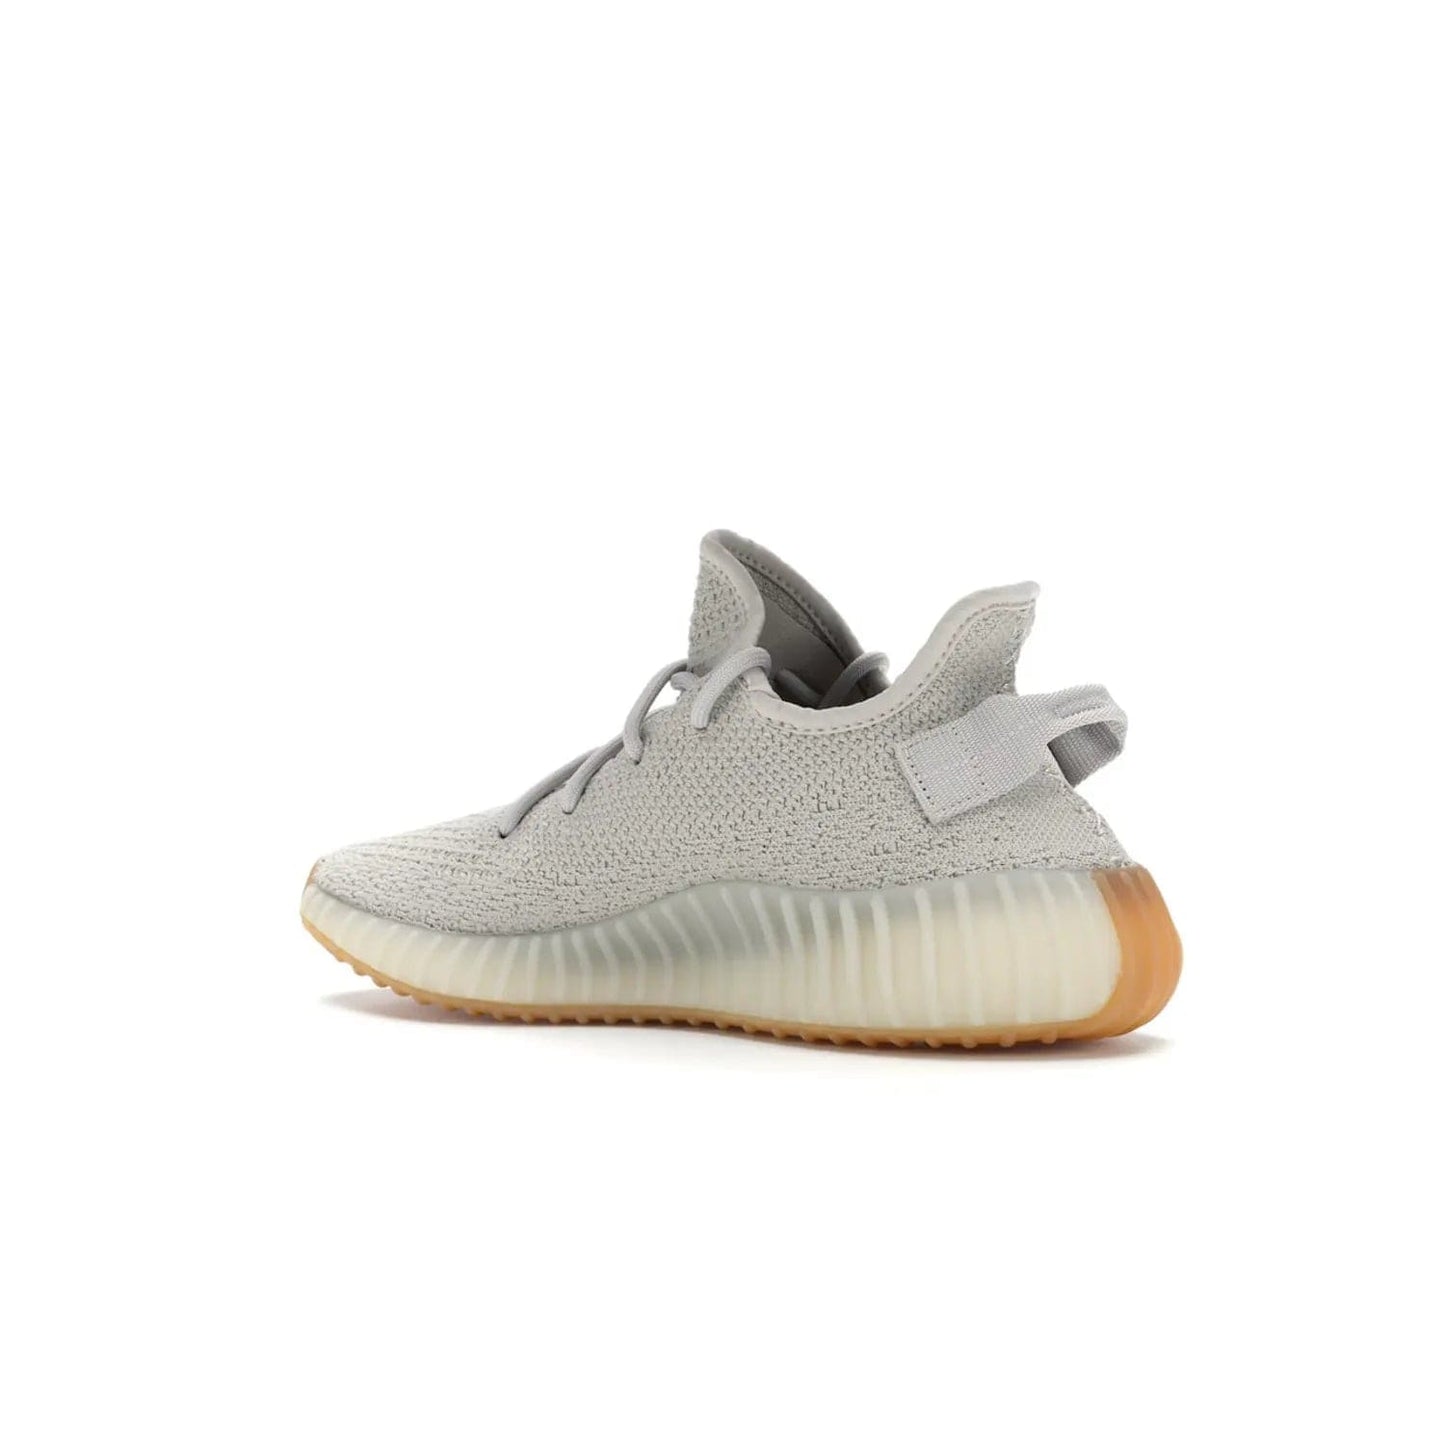 adidas Yeezy Boost 350 V2 Sesame - Image 23 - Only at www.BallersClubKickz.com - Introducing the adidas Yeezy Boost 350 V2 Sesame. Featuring a sesame upper, midsole and gum sole for a sleek silhouette. Cop the stylish sneaker released in November 2018.